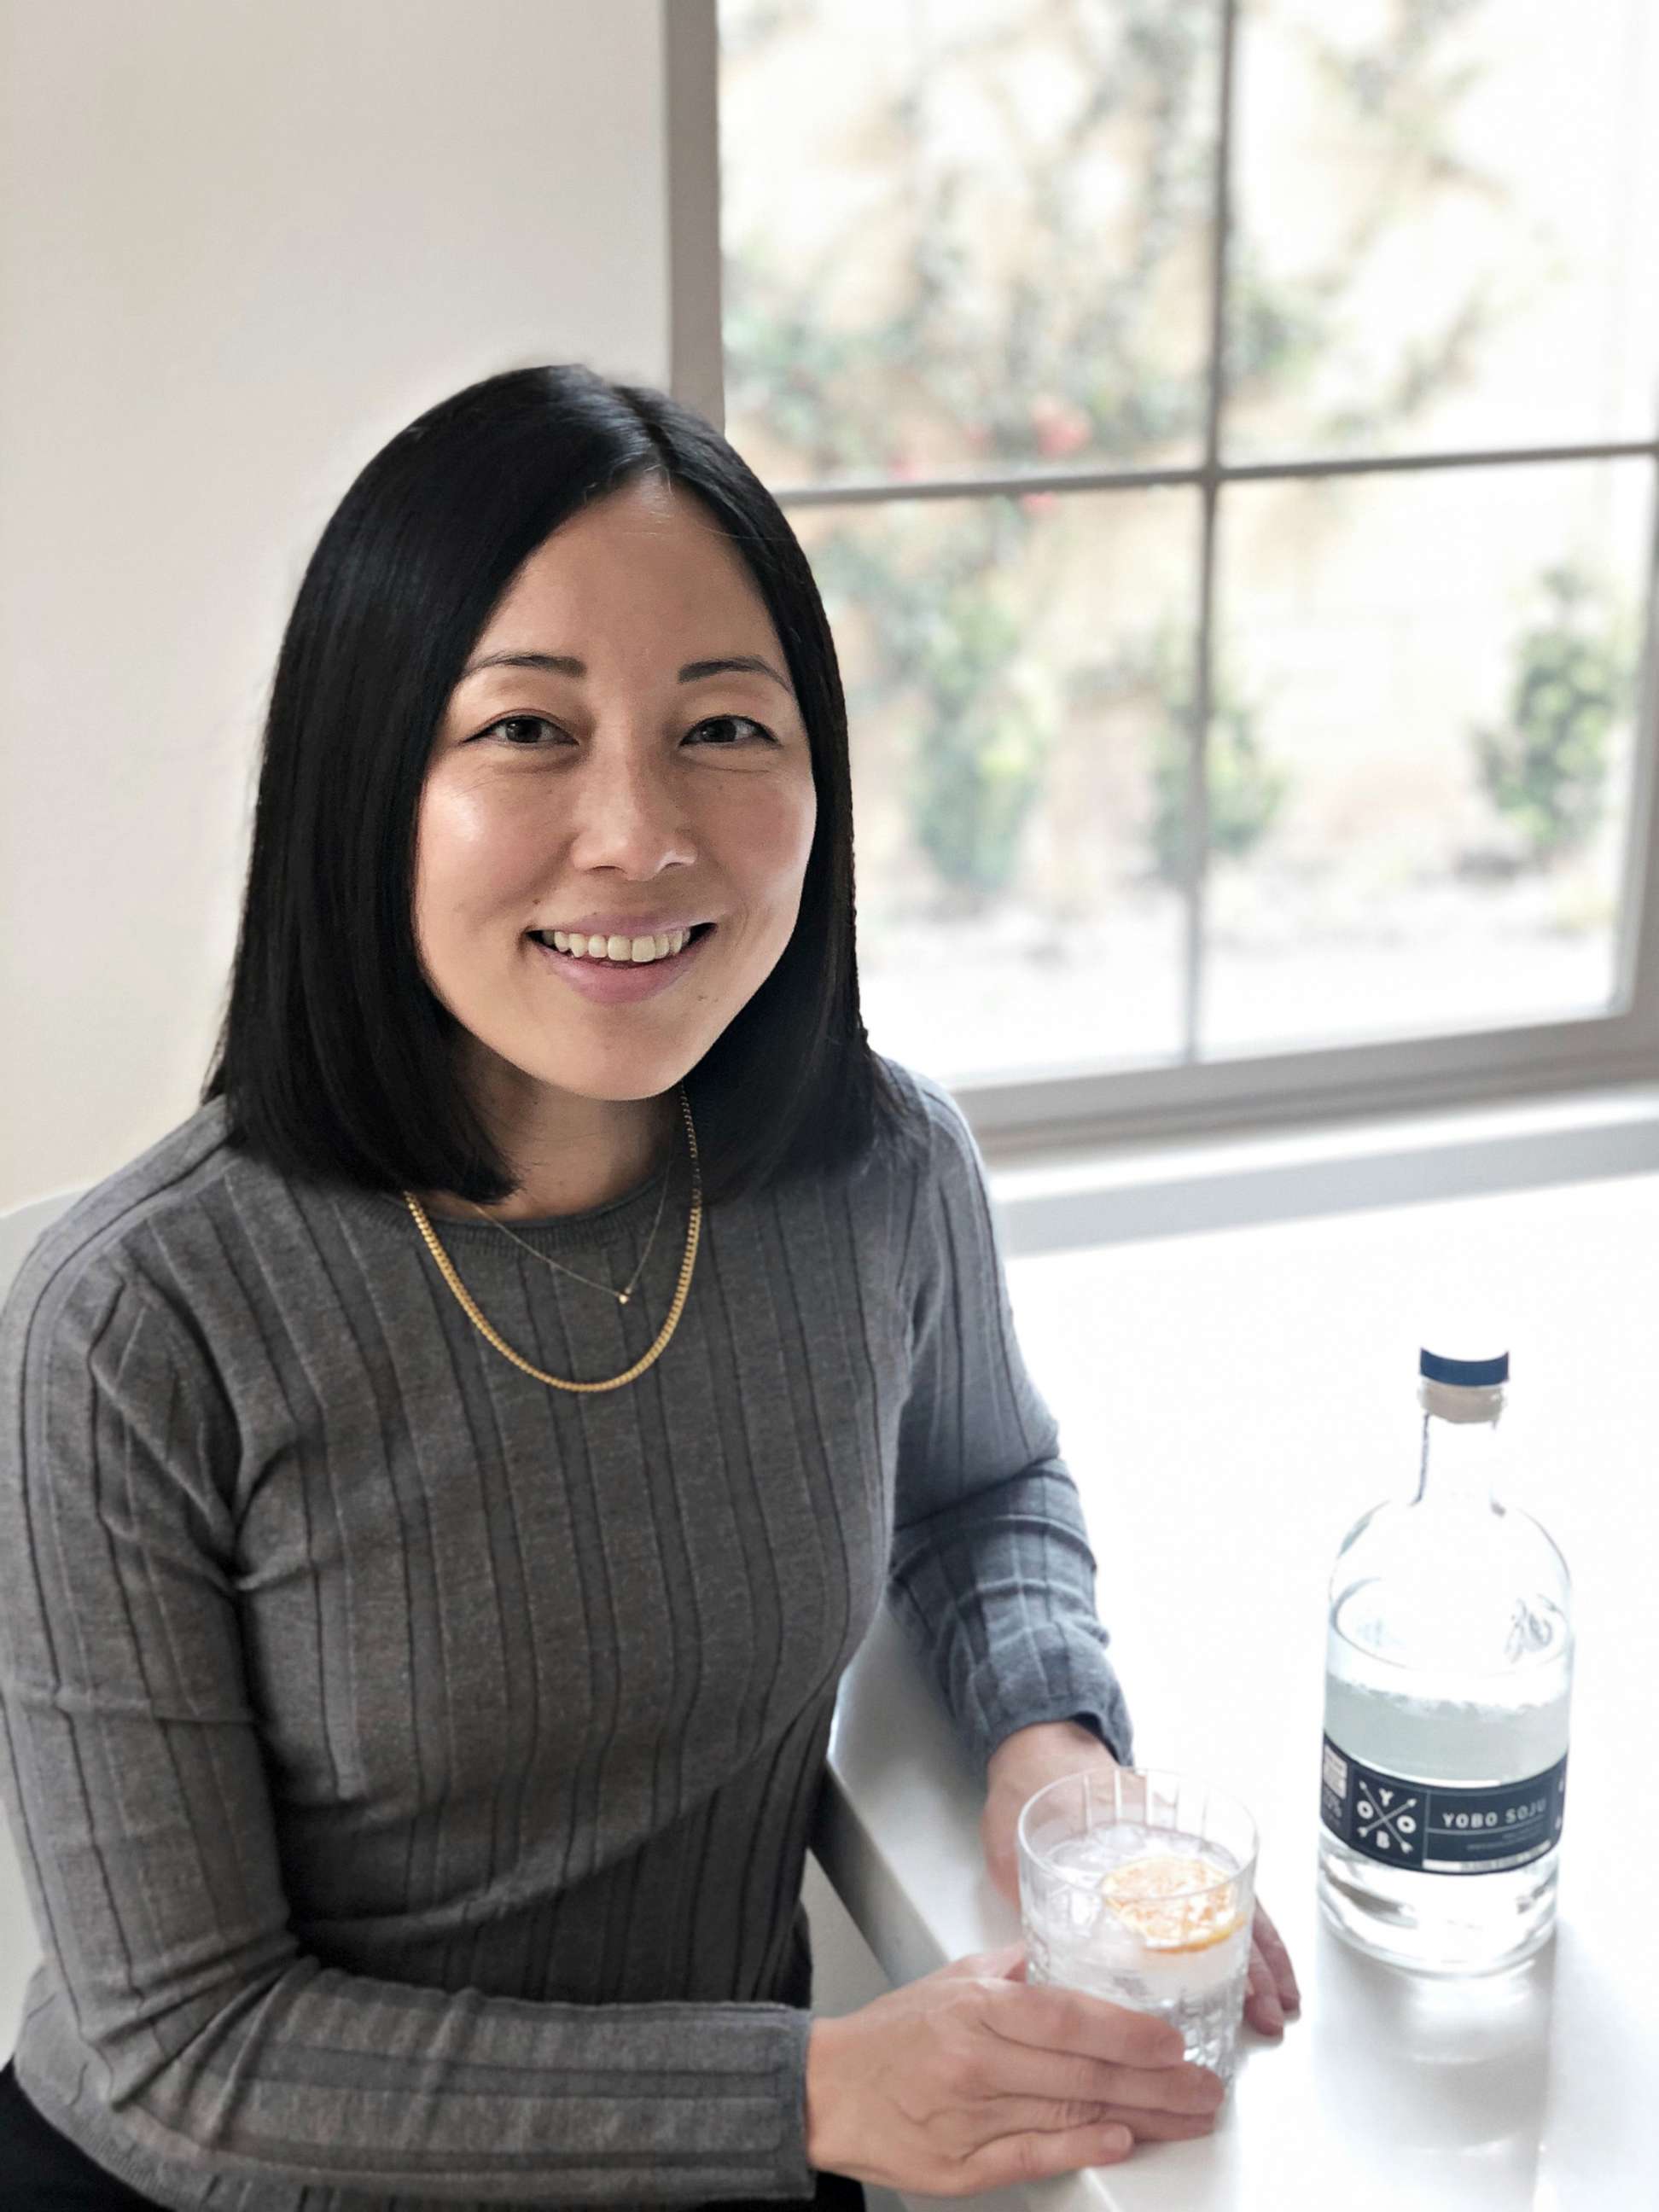 PHOTO: Korean American entrepreneur Carolyn Kim, 41, launched Yobo Soju in 2015. "A modern Korean spirit doesn't just have to be sold in a Korean or other Asian restaurant," Kim said.